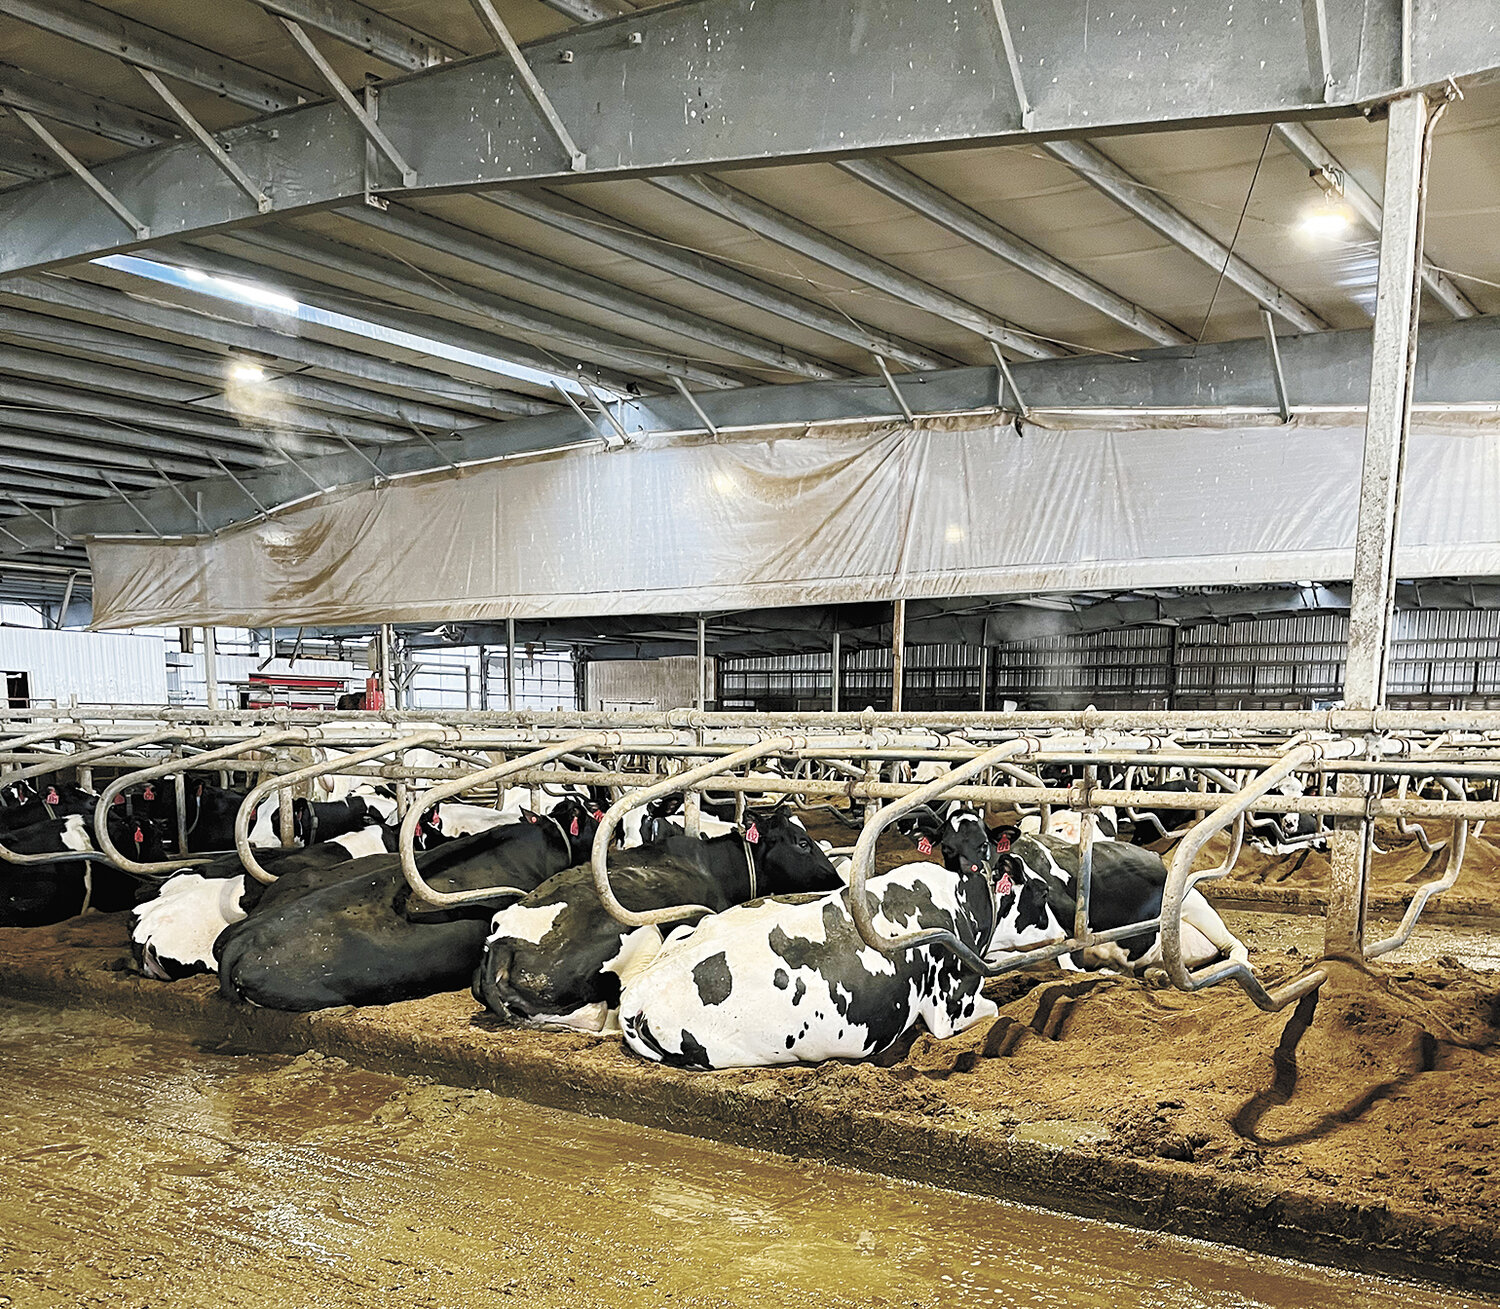 The herd rests in free stalls bedded with recovered manure solids Jan. 16 at J & S Dairy near Sioux Center, Iowa. The temperature in the cross-ventilated barn remains above freezing even during the deepest cold snaps.